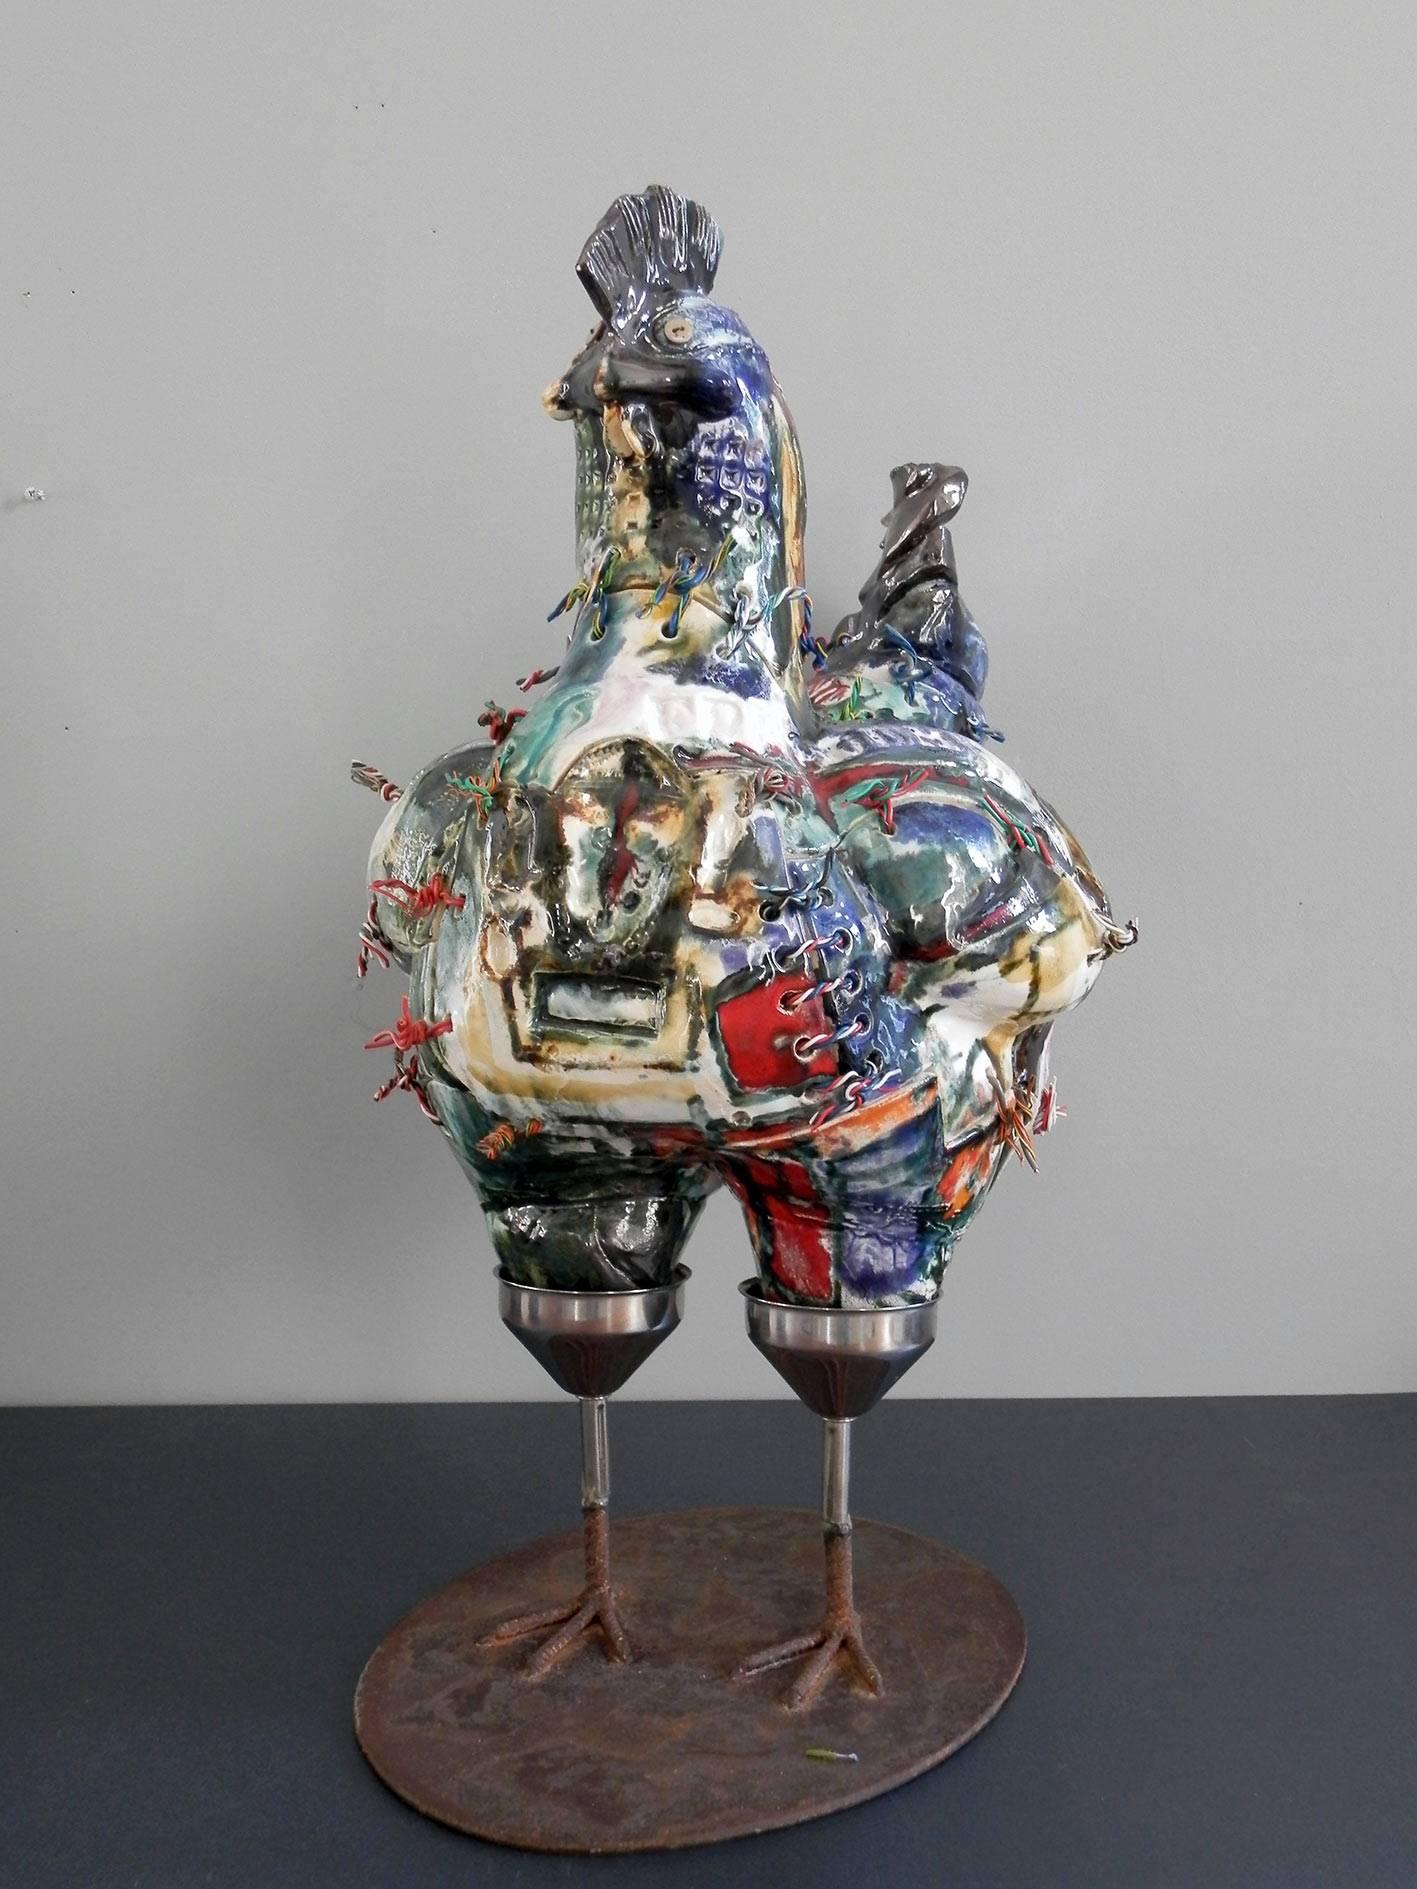 Other Lifesize Glazed Ceramic Hen Sculpture by Italian Artist Roberta Colombo For Sale